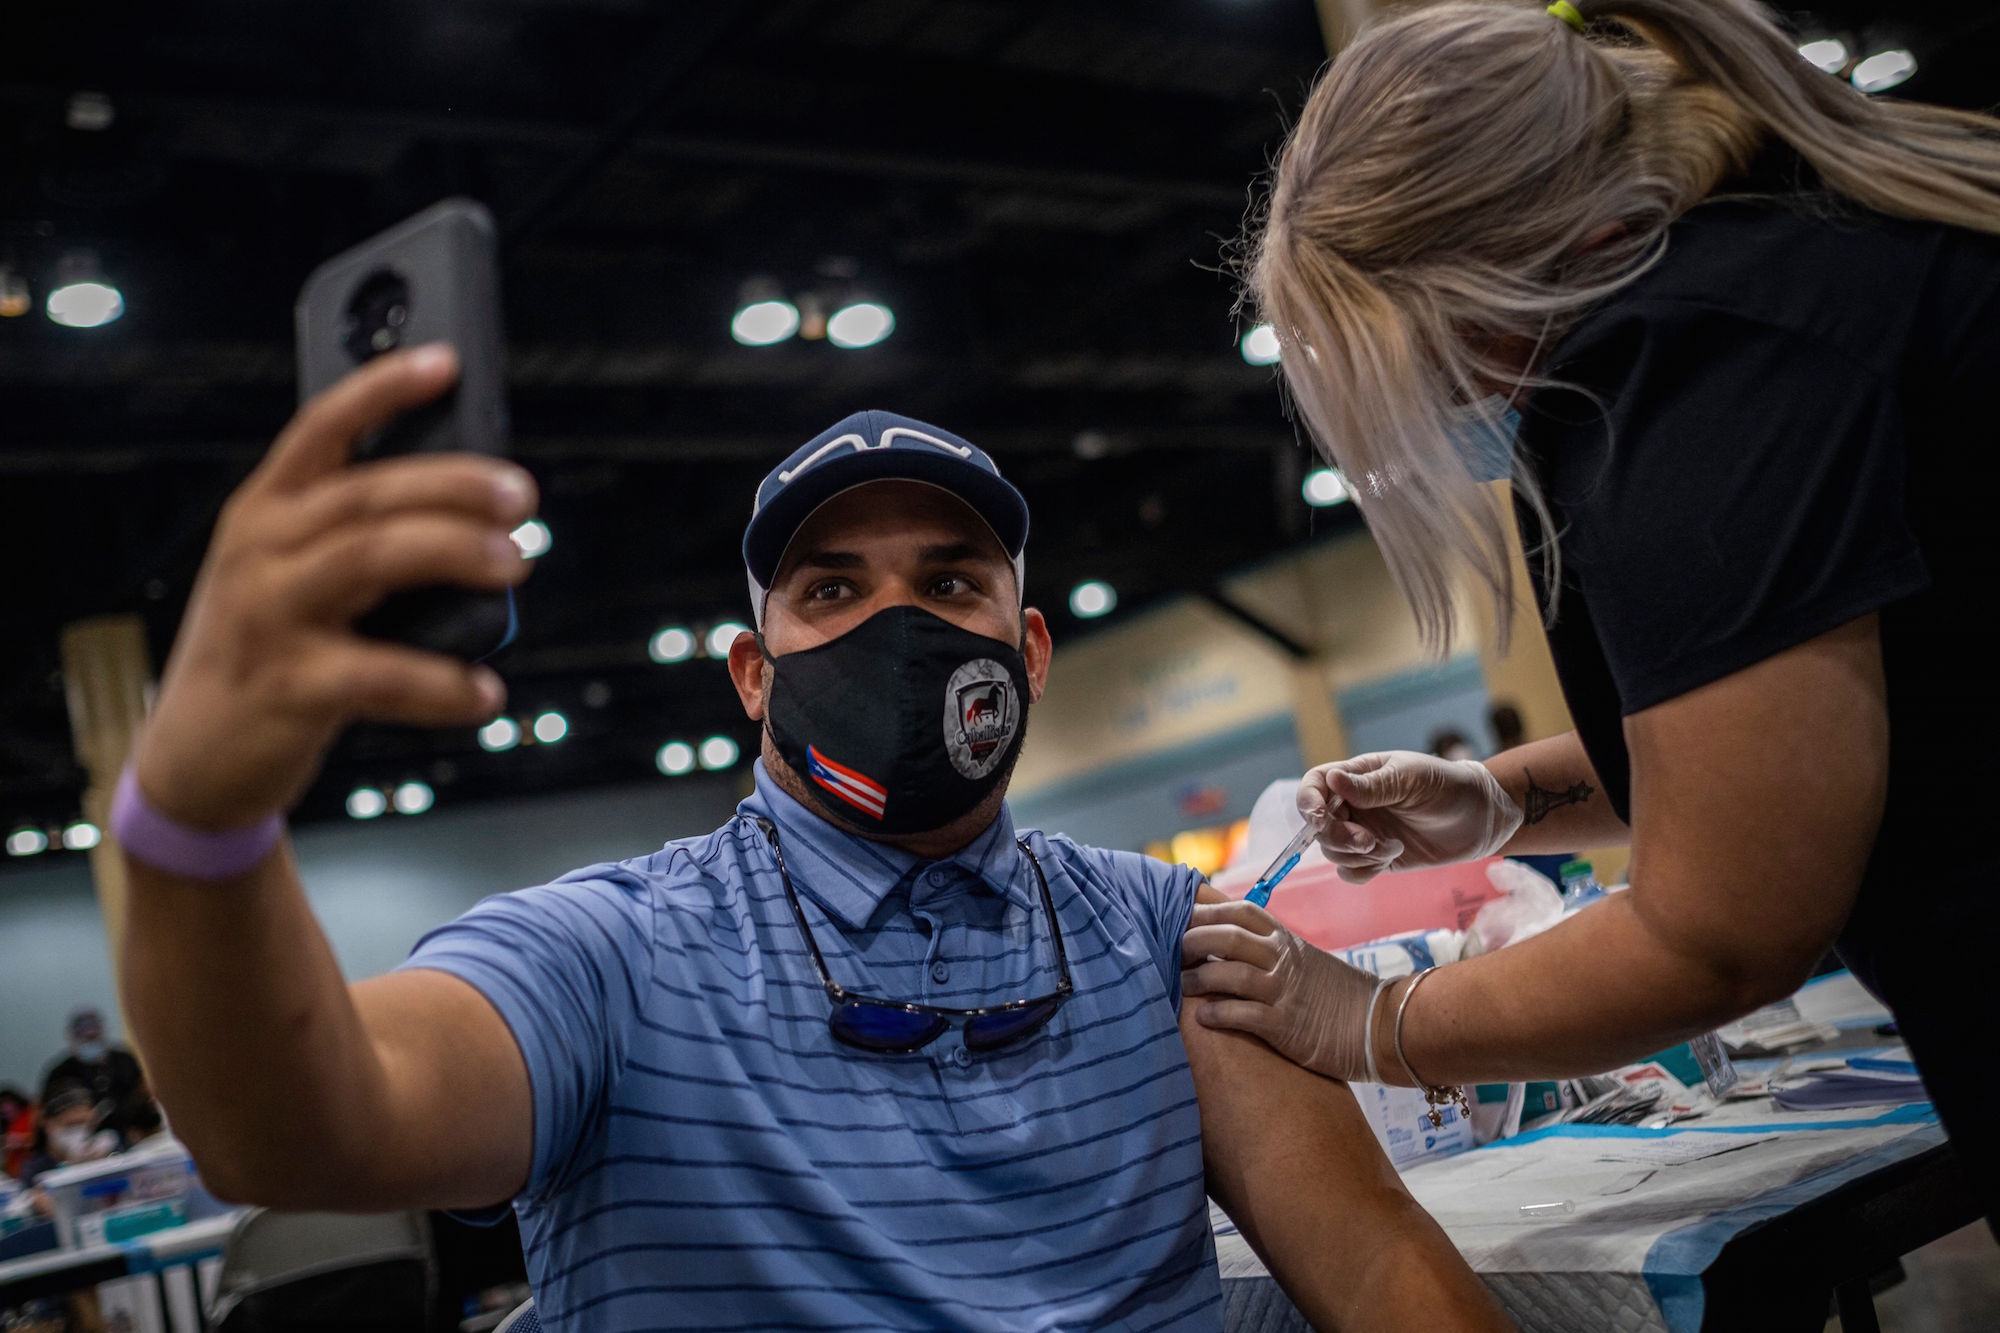 A man takes a selfie as he receives the Johnson and Johnson Covid-19 vaccine at a mass vaccination event at the Puerto Rico Convention Center in San Juan, Puerto Rico on March 31, 2021. (Photo by Ricardo ARDUENGO / AFP) (Photo by RICARDO ARDUENGO/AFP via Getty Images)